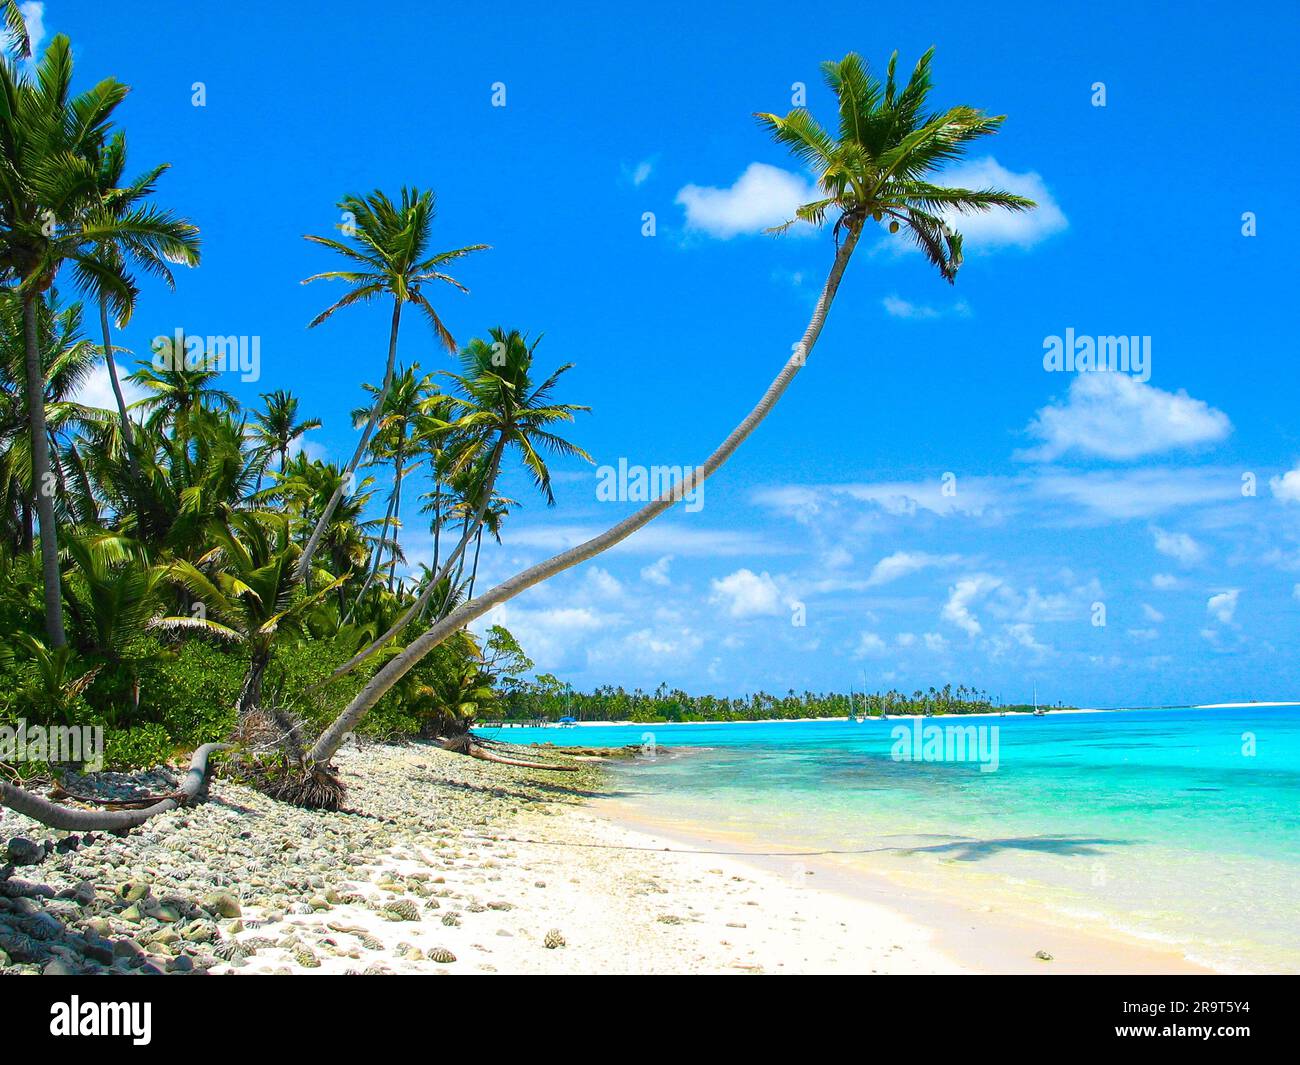 Magnificent coconut palm and blue lagoon at Cocos Keelint atoll, Indian Ocean, Australia. Stock Photo